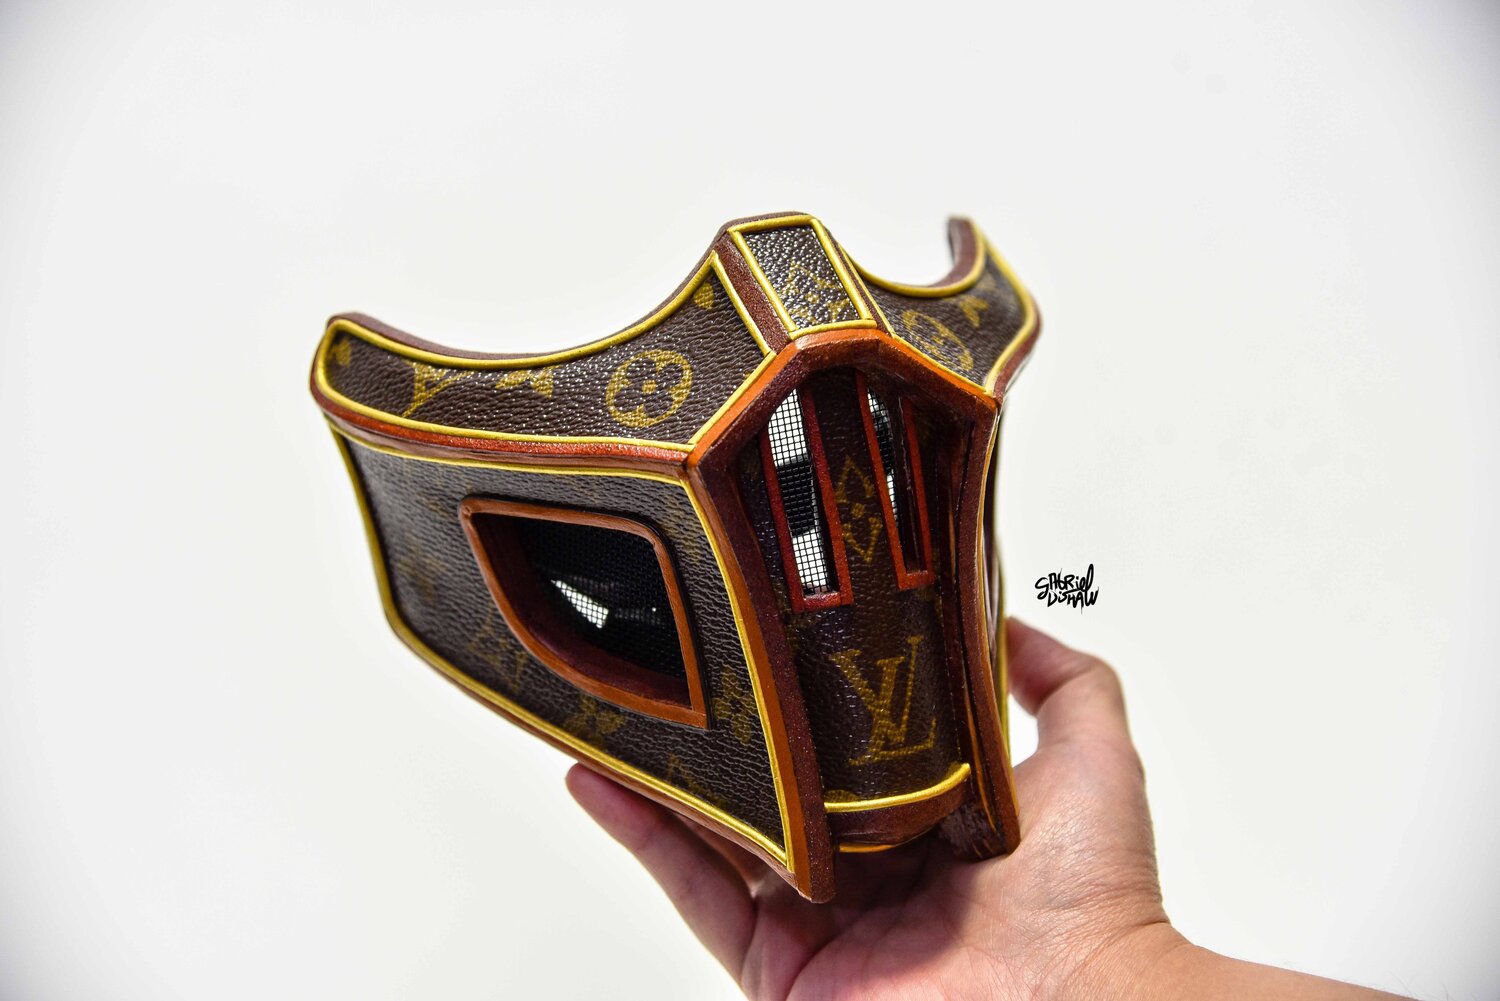 zvcht lv mask for Sale in Norridge, IL - OfferUp